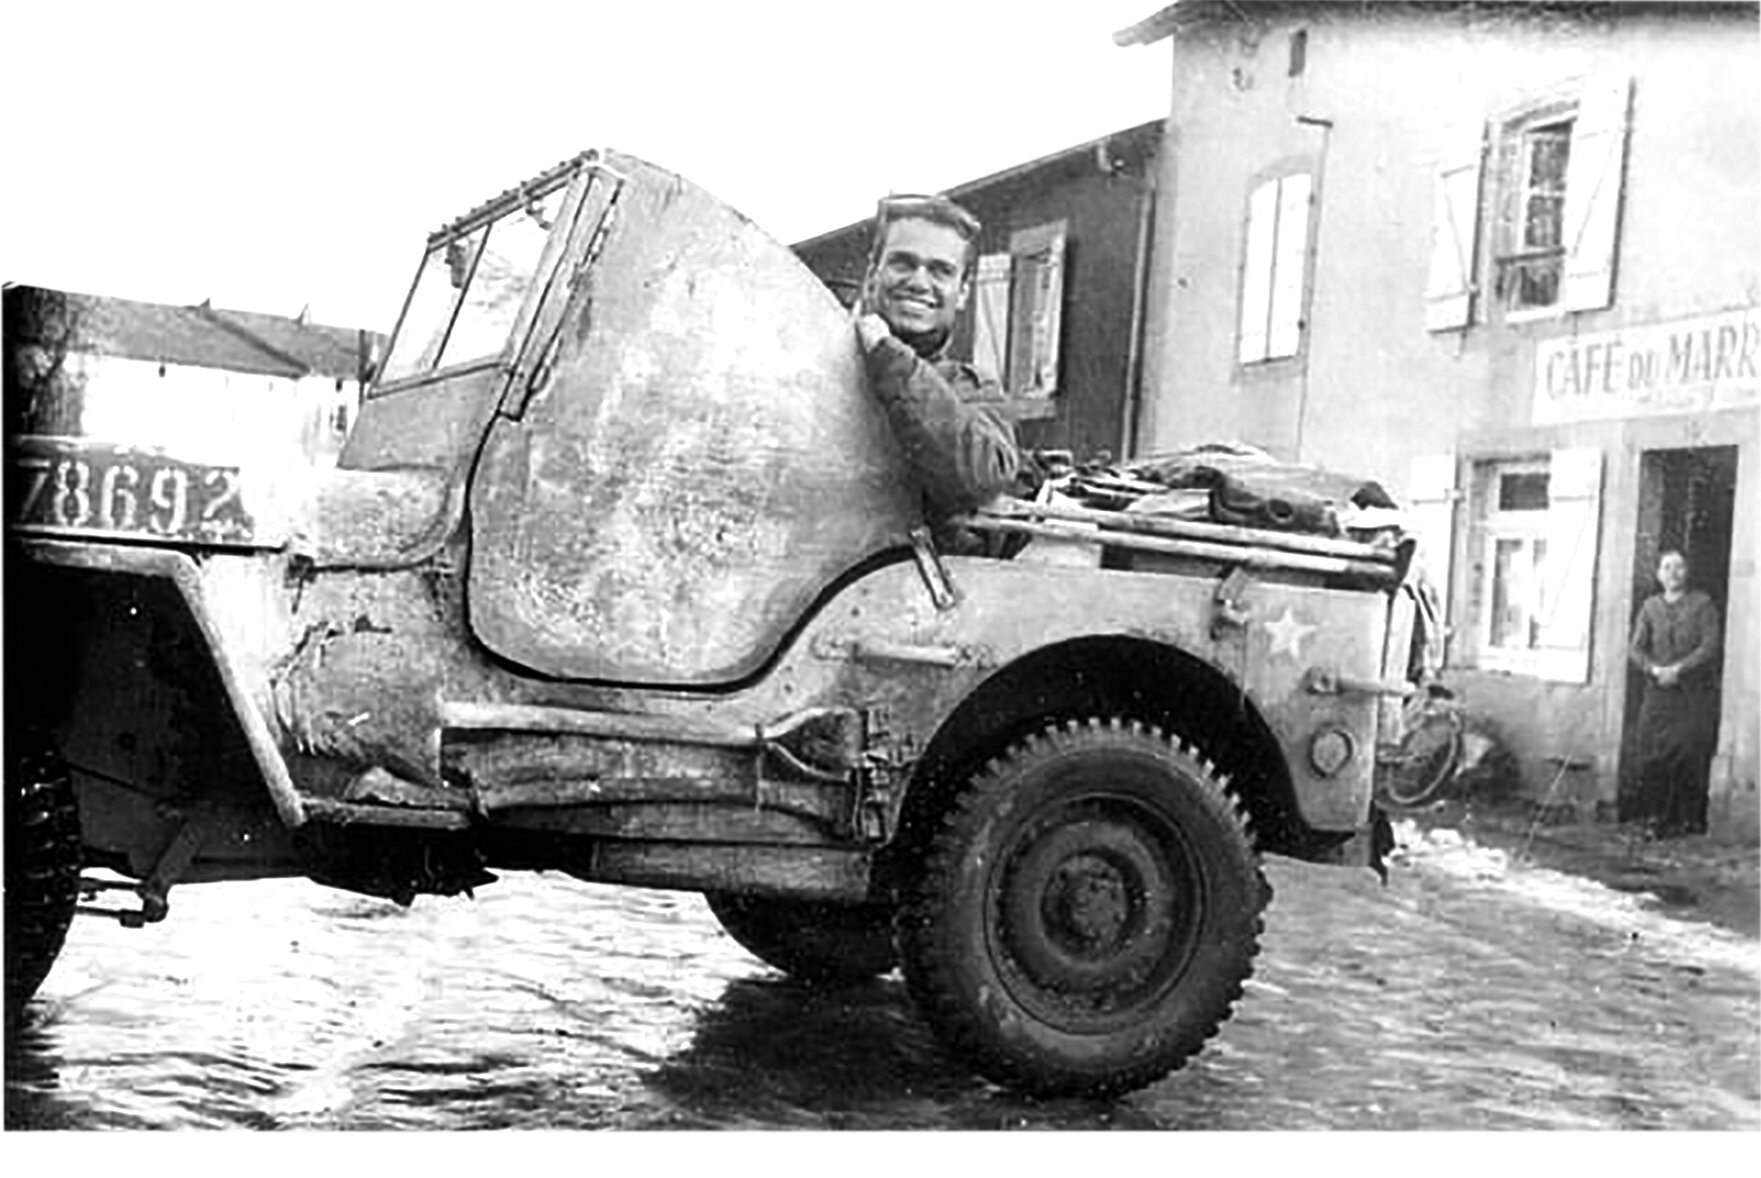 Blass served in the Ghost Army during World War II.